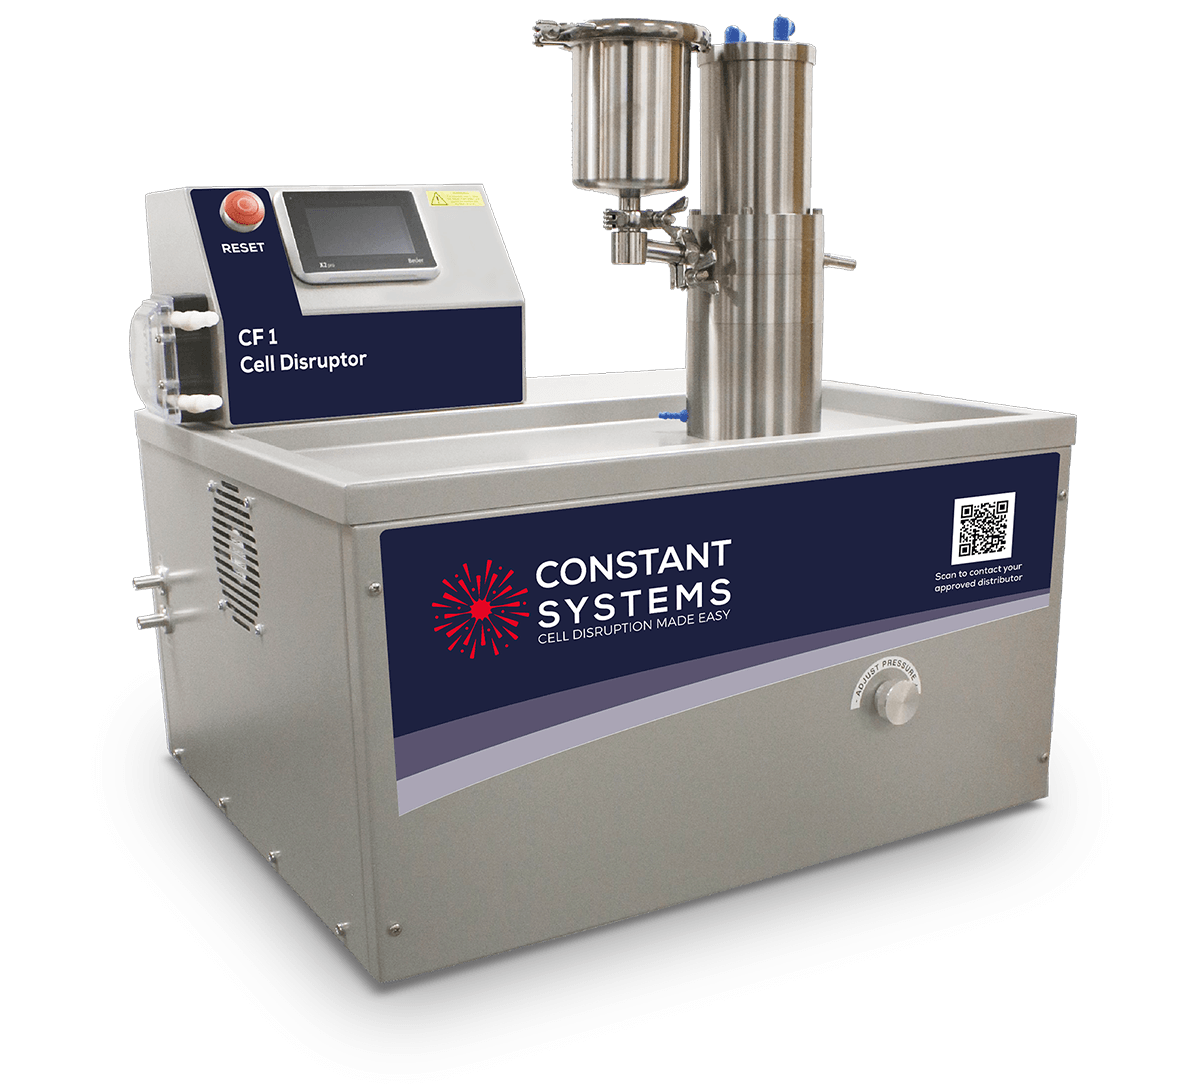 Constant Systems CF1 Cell Disruptor High pressure homogenizer